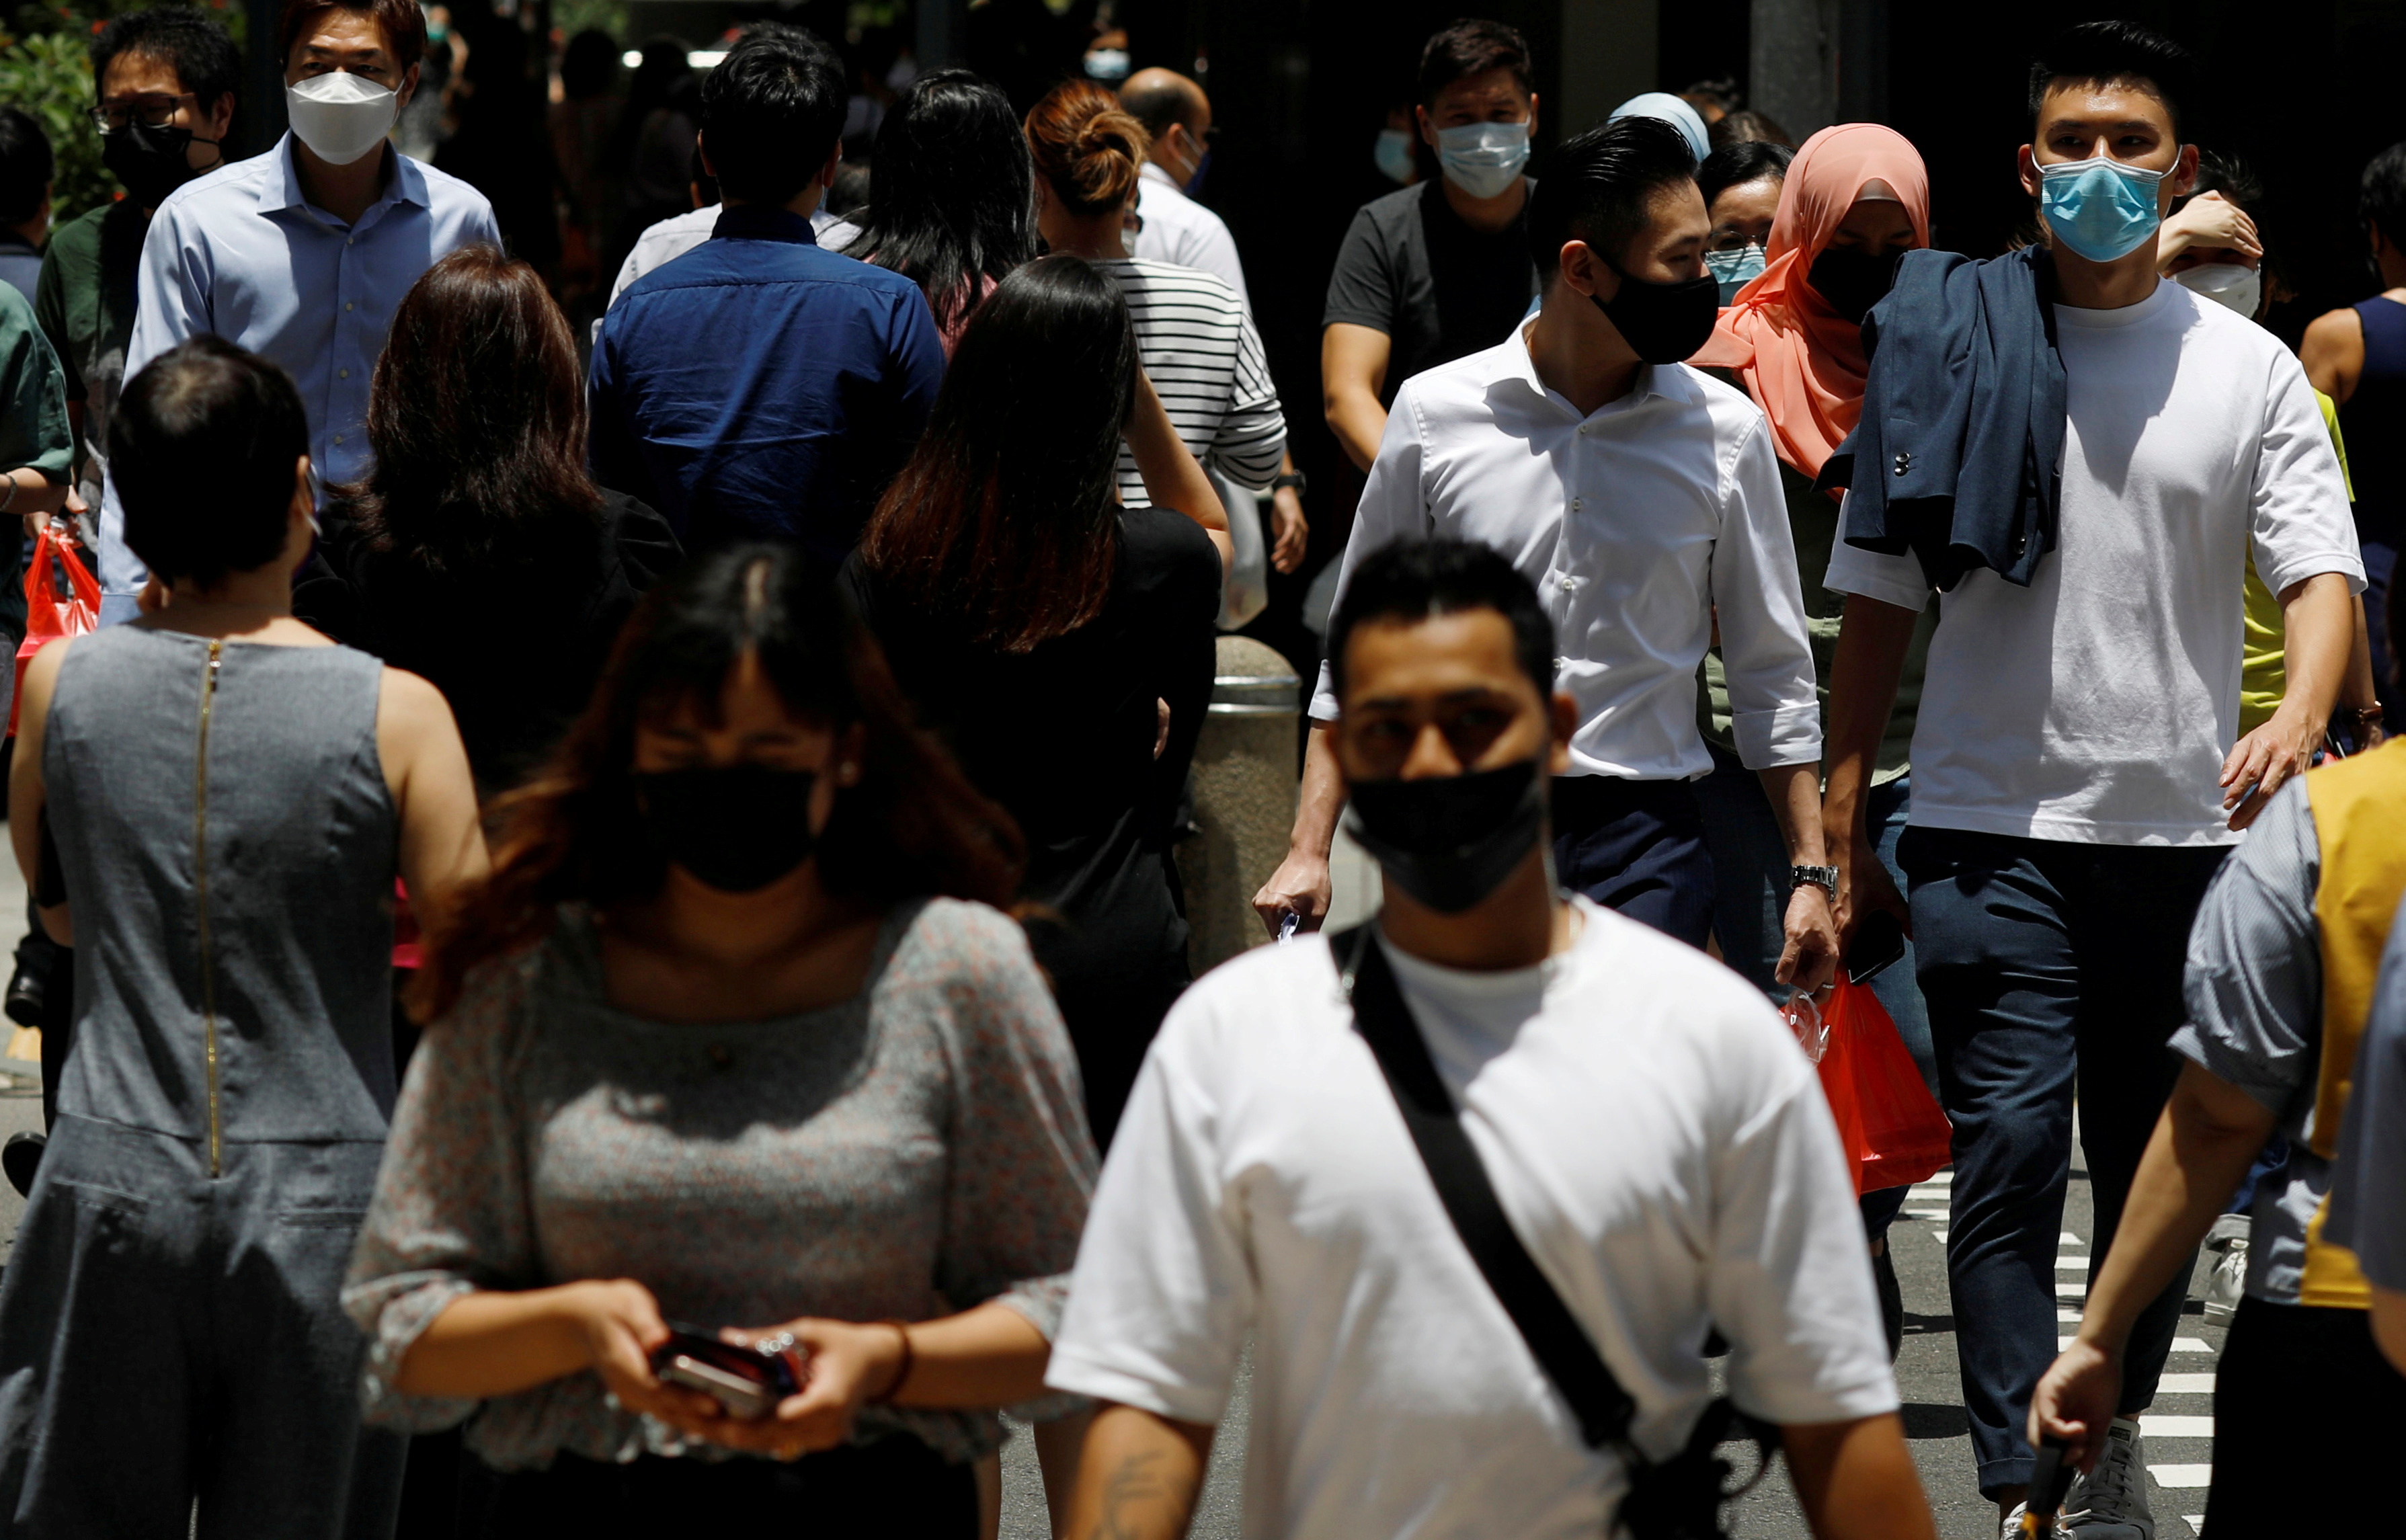 Office workers spend their lunch breaks at the central business district amid the COVID-19 outbreak in Singapore, September 8, 2021. REUTERS/Edgar Su